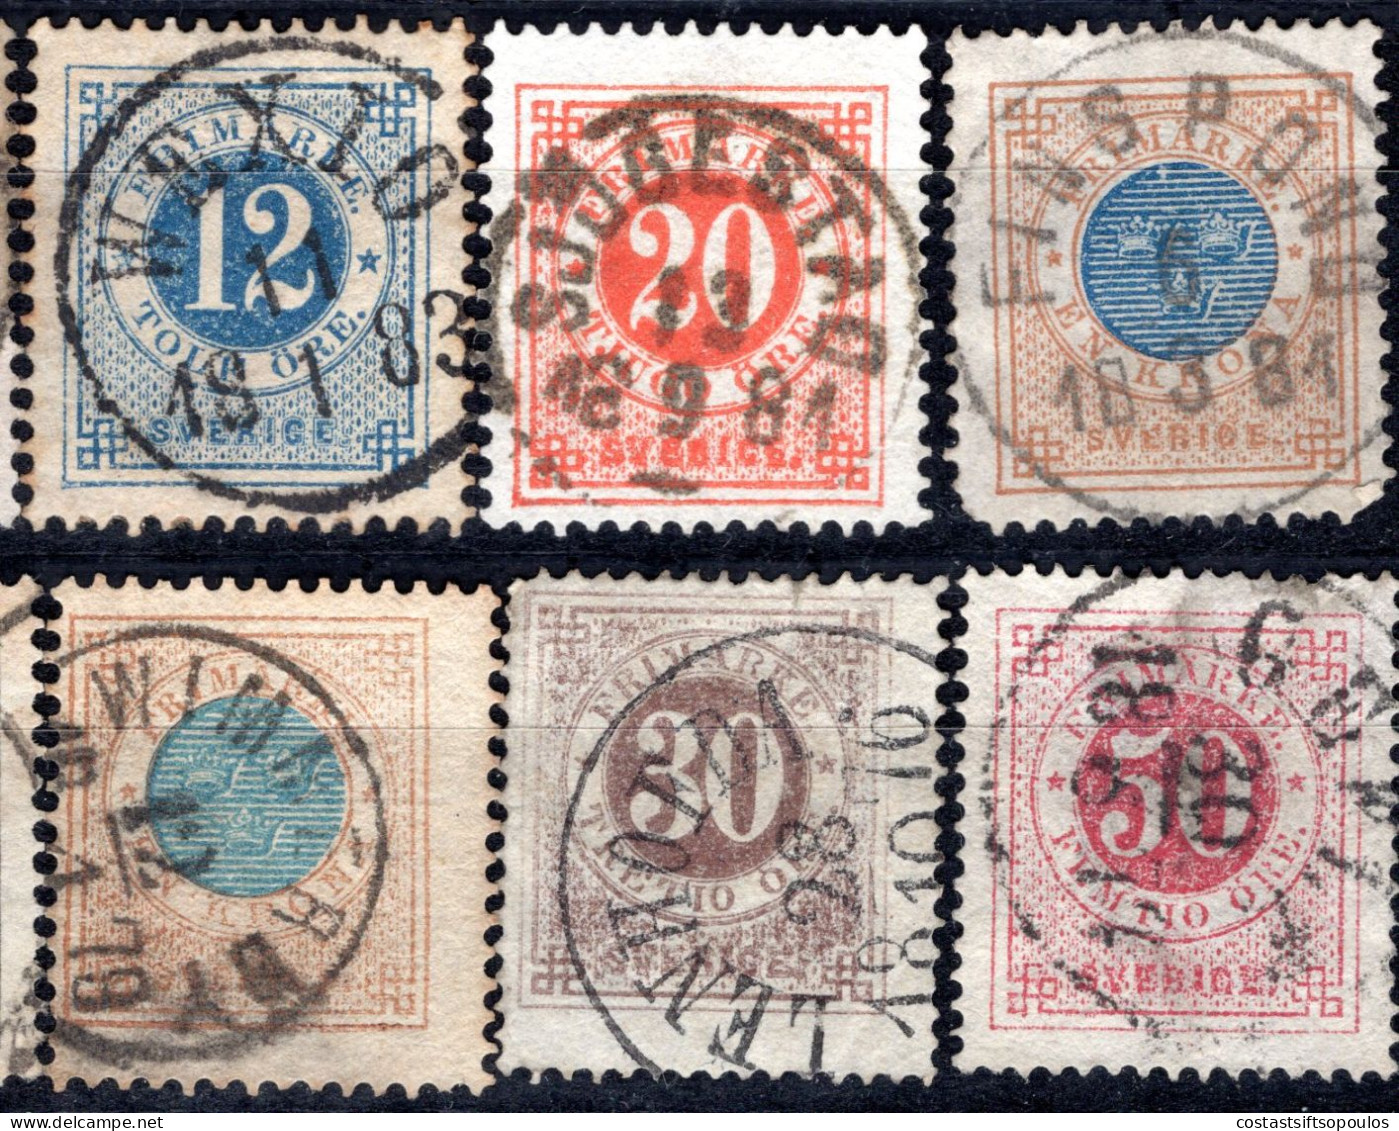 1902. SWEDEN. 45 CLASSIC ST. WITH NICE POSTMARKS LOT, VERY FEW WITH FAULTS, 7 SCANS